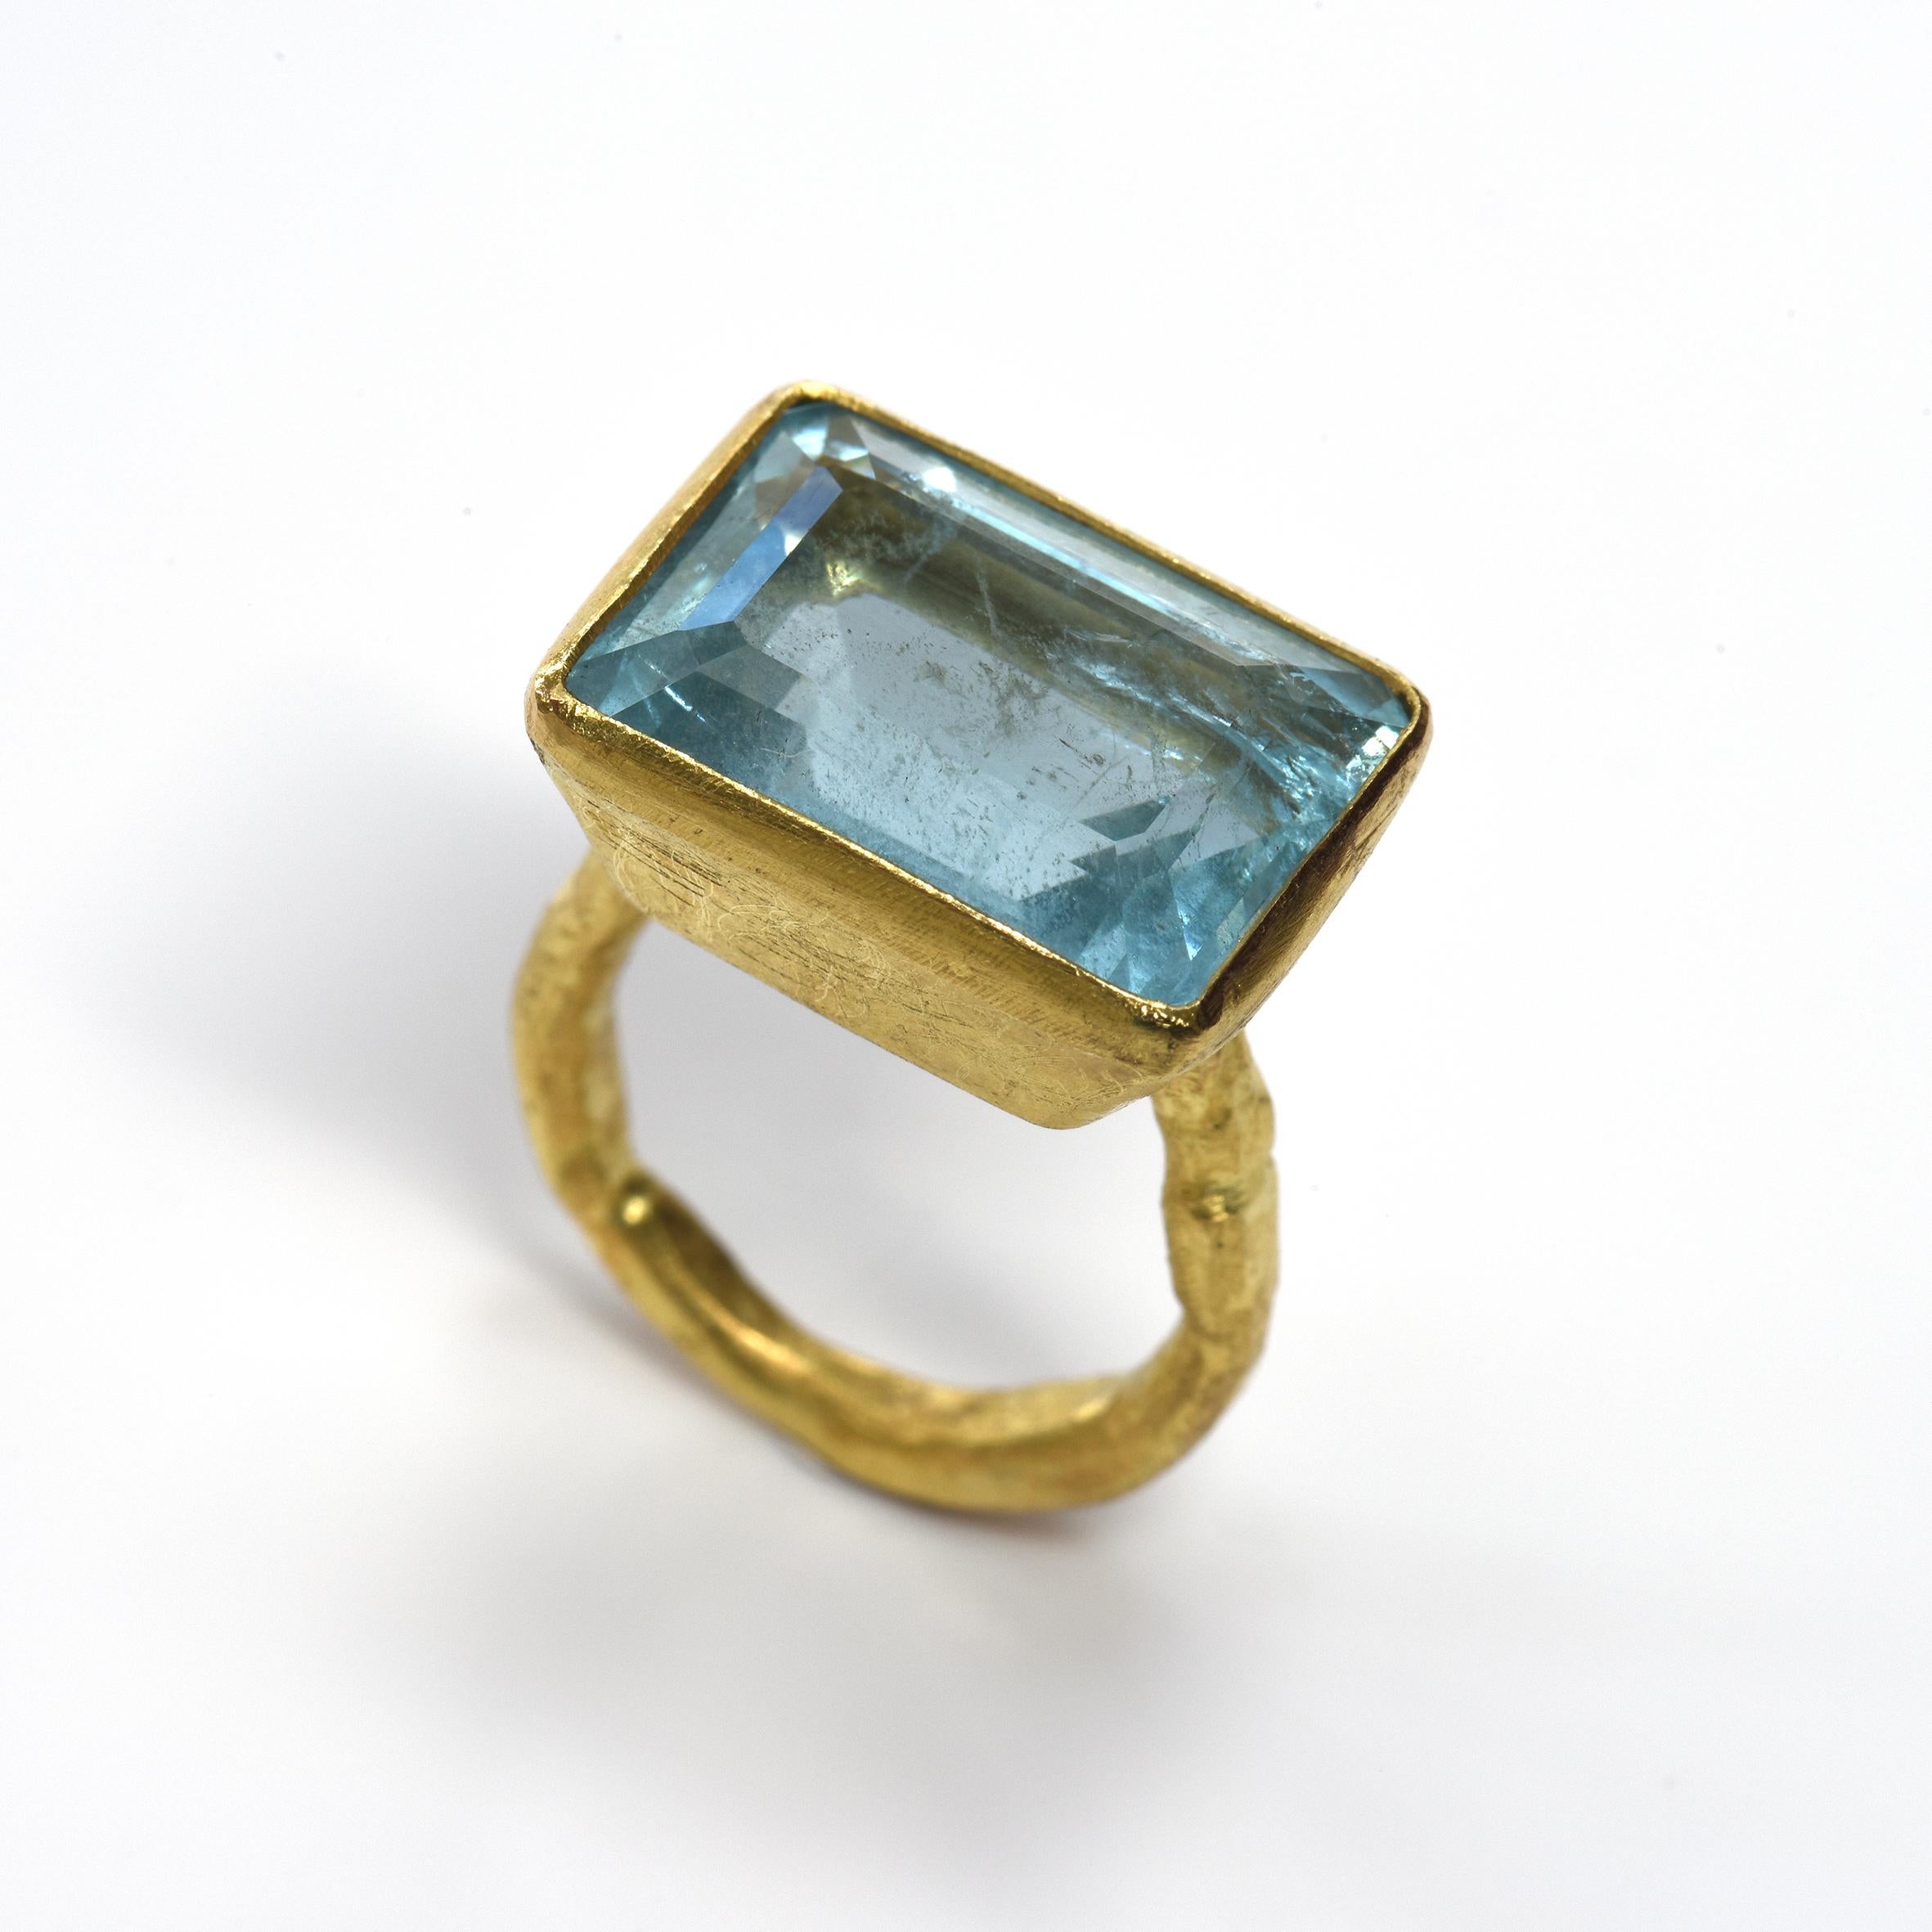 Large 13.68 Carat Aquamarine 18 Karat Gold Cocktail Ring by Disa Allsopp In New Condition For Sale In London, GB